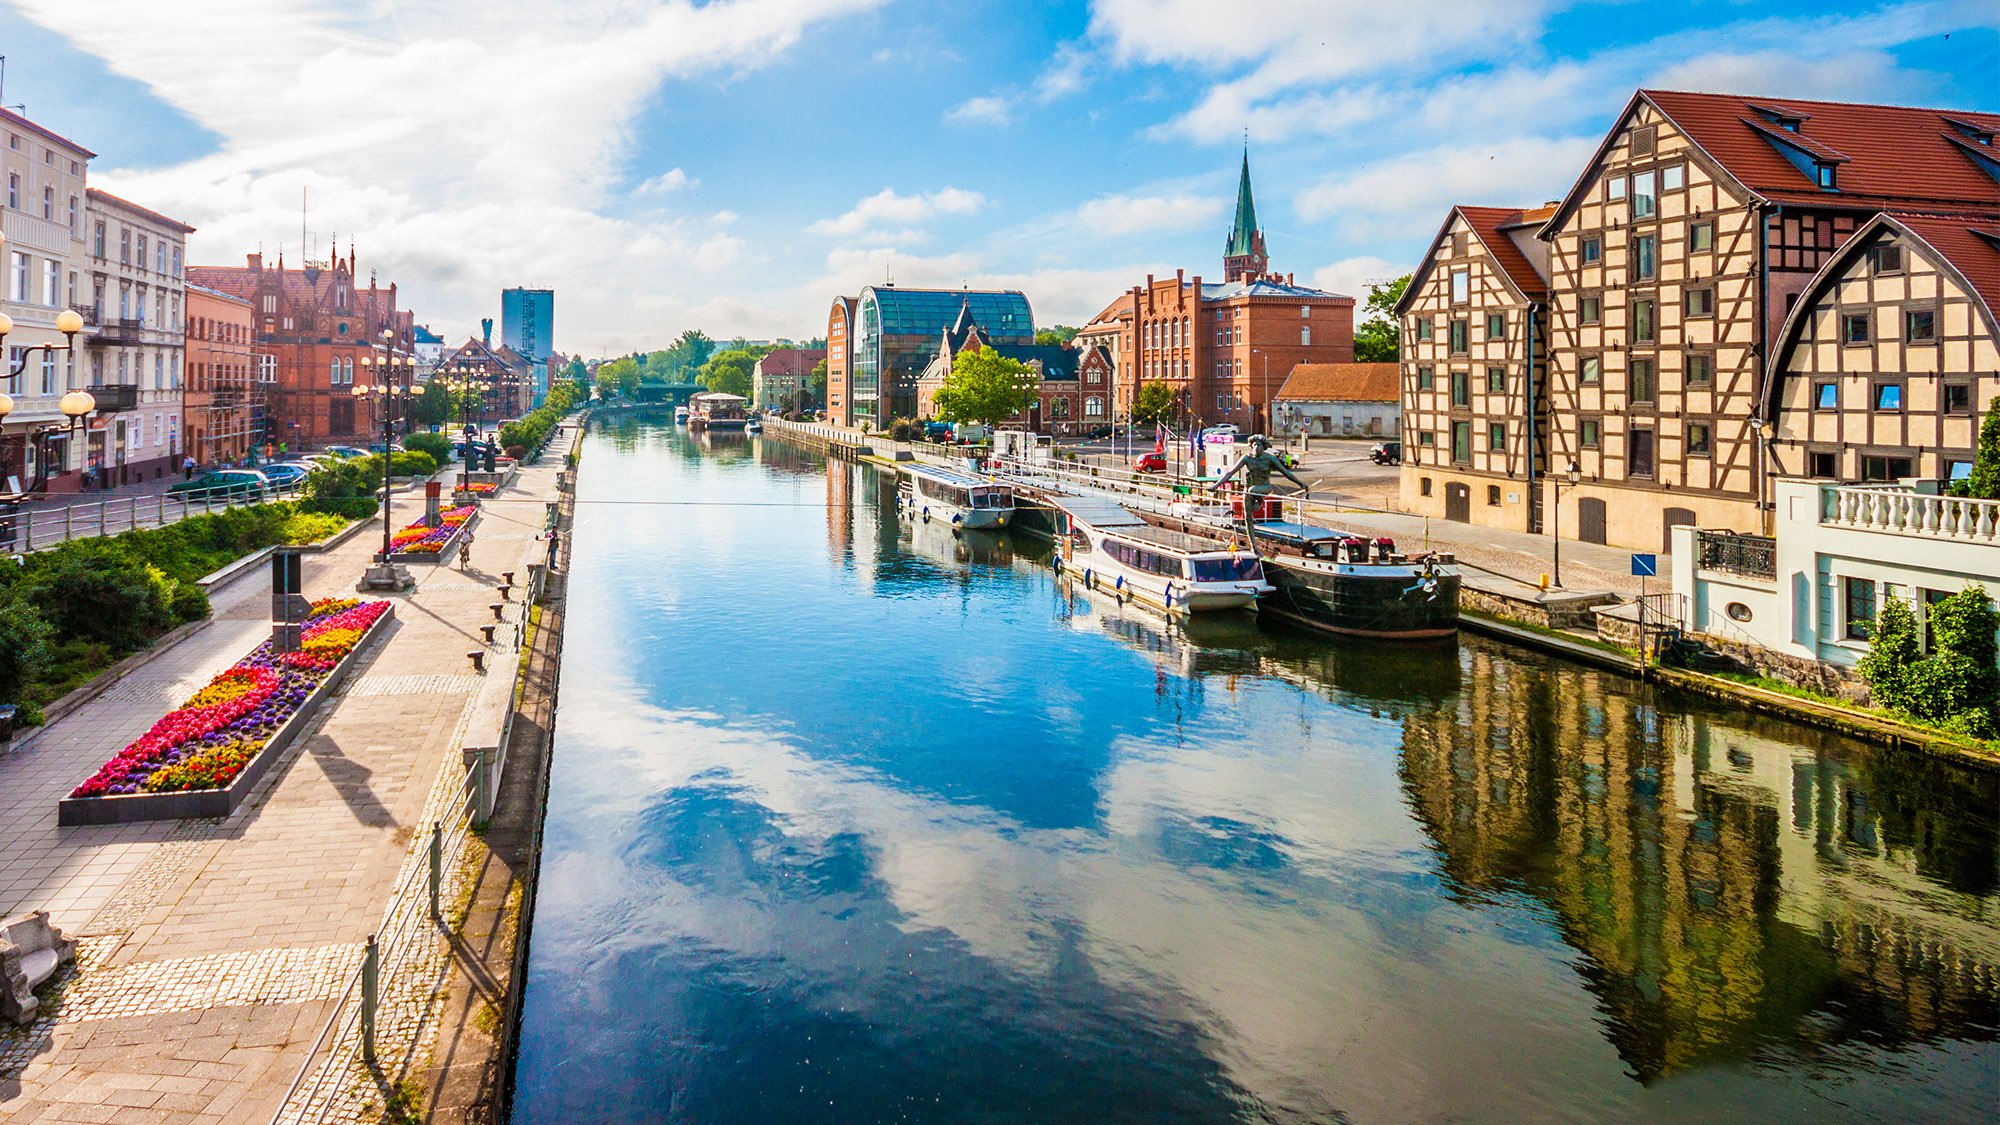 Helping Bydgoszcz become flood resilient